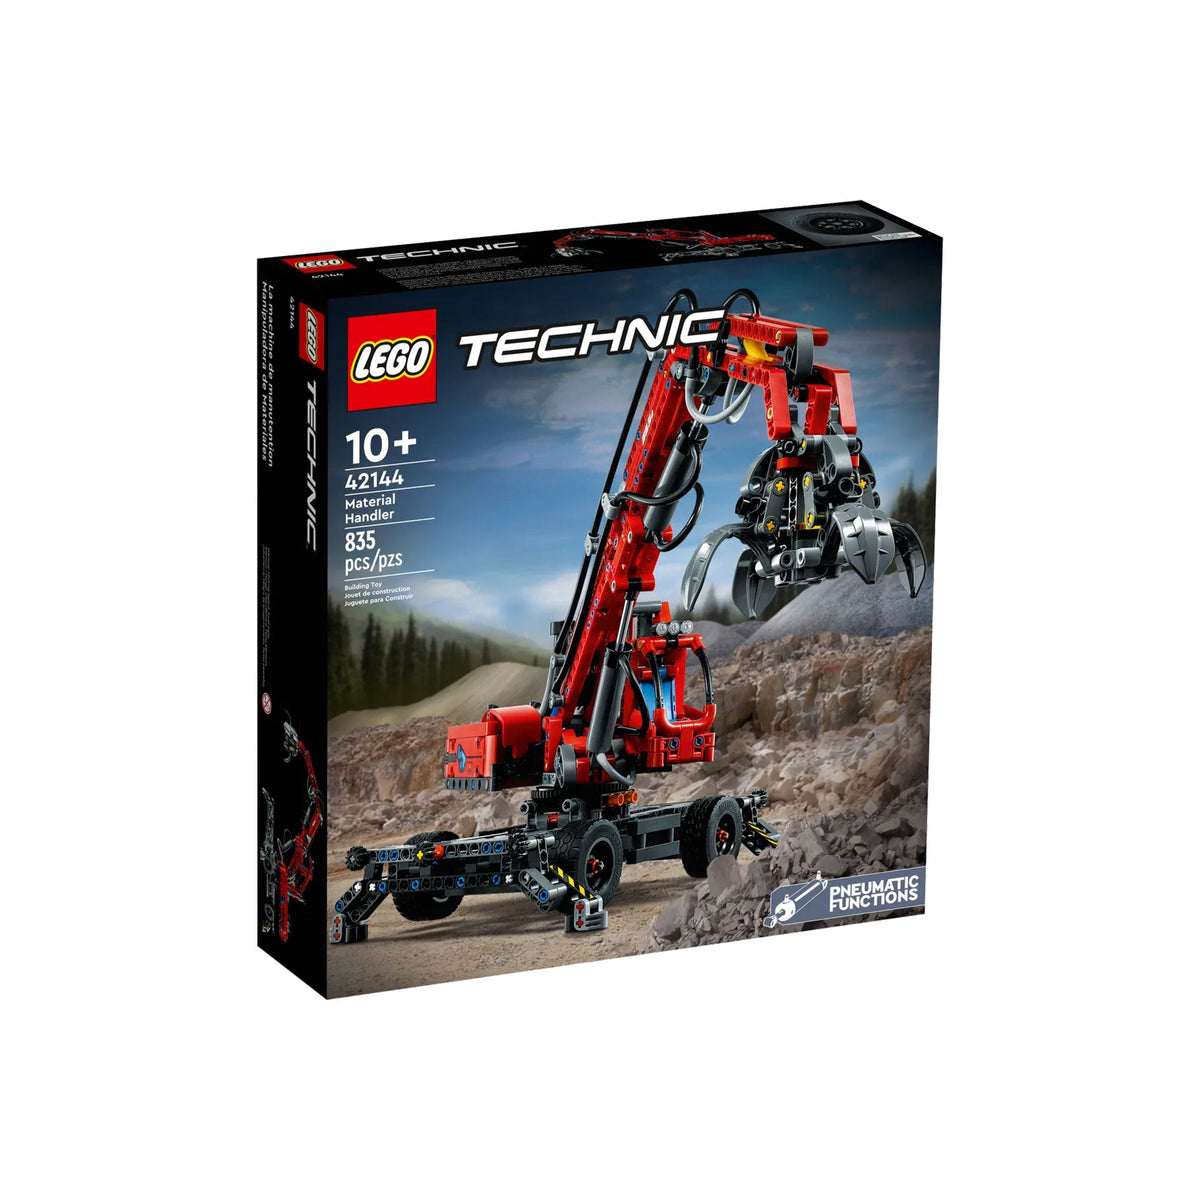 LEGO Toys & Games LEGO Technic Material Handler, 42144, Ages 10+, 835 Pieces 673419358897